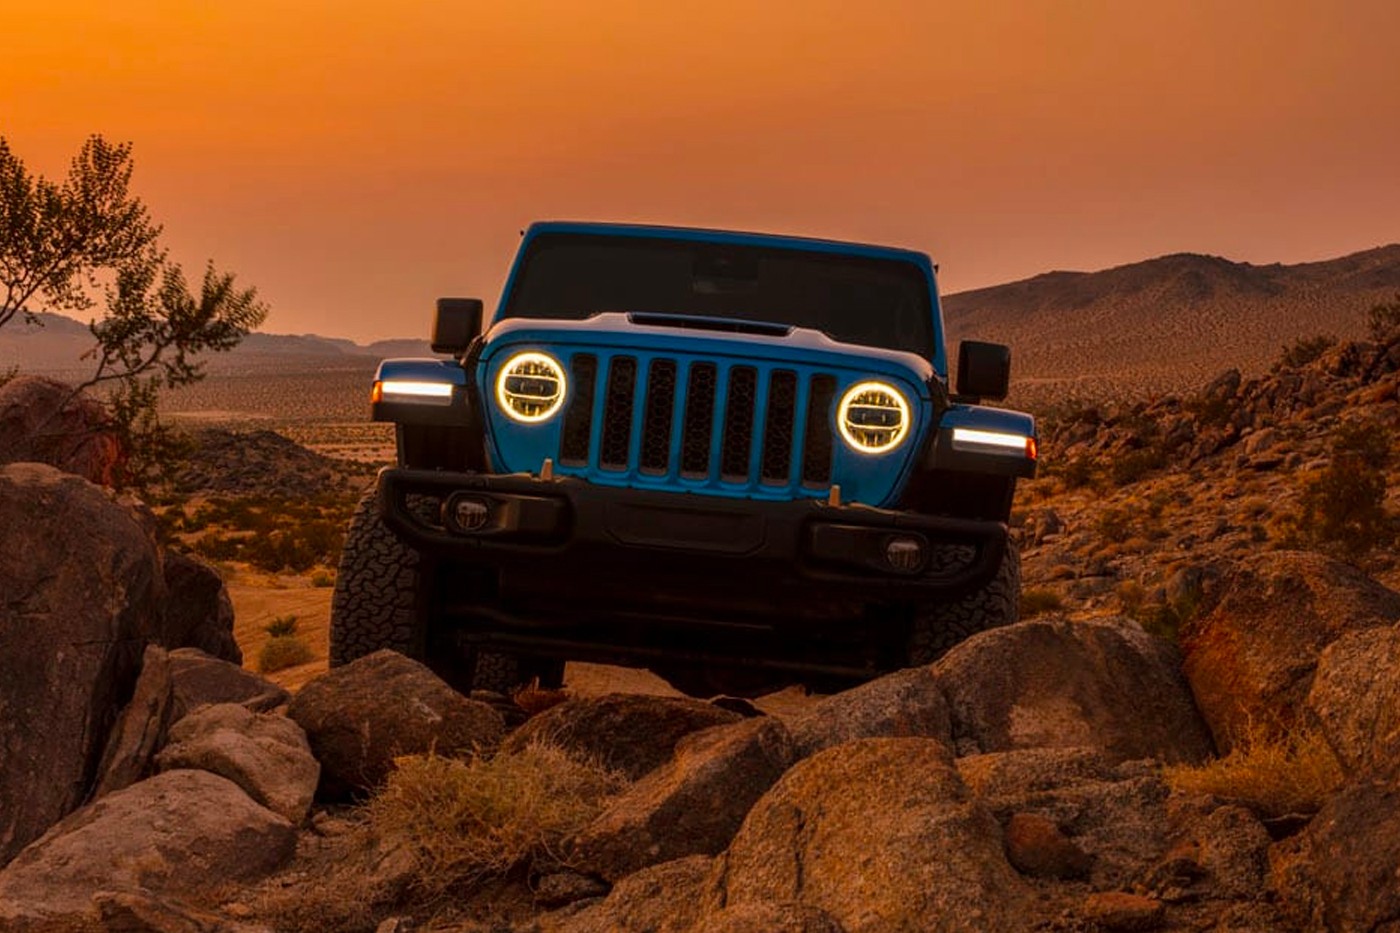 New Wrangler Rubicon 392 is Jeep's beefiest 4x4 ever | Esquire Middle East  – The Region's Best Men's Magazine